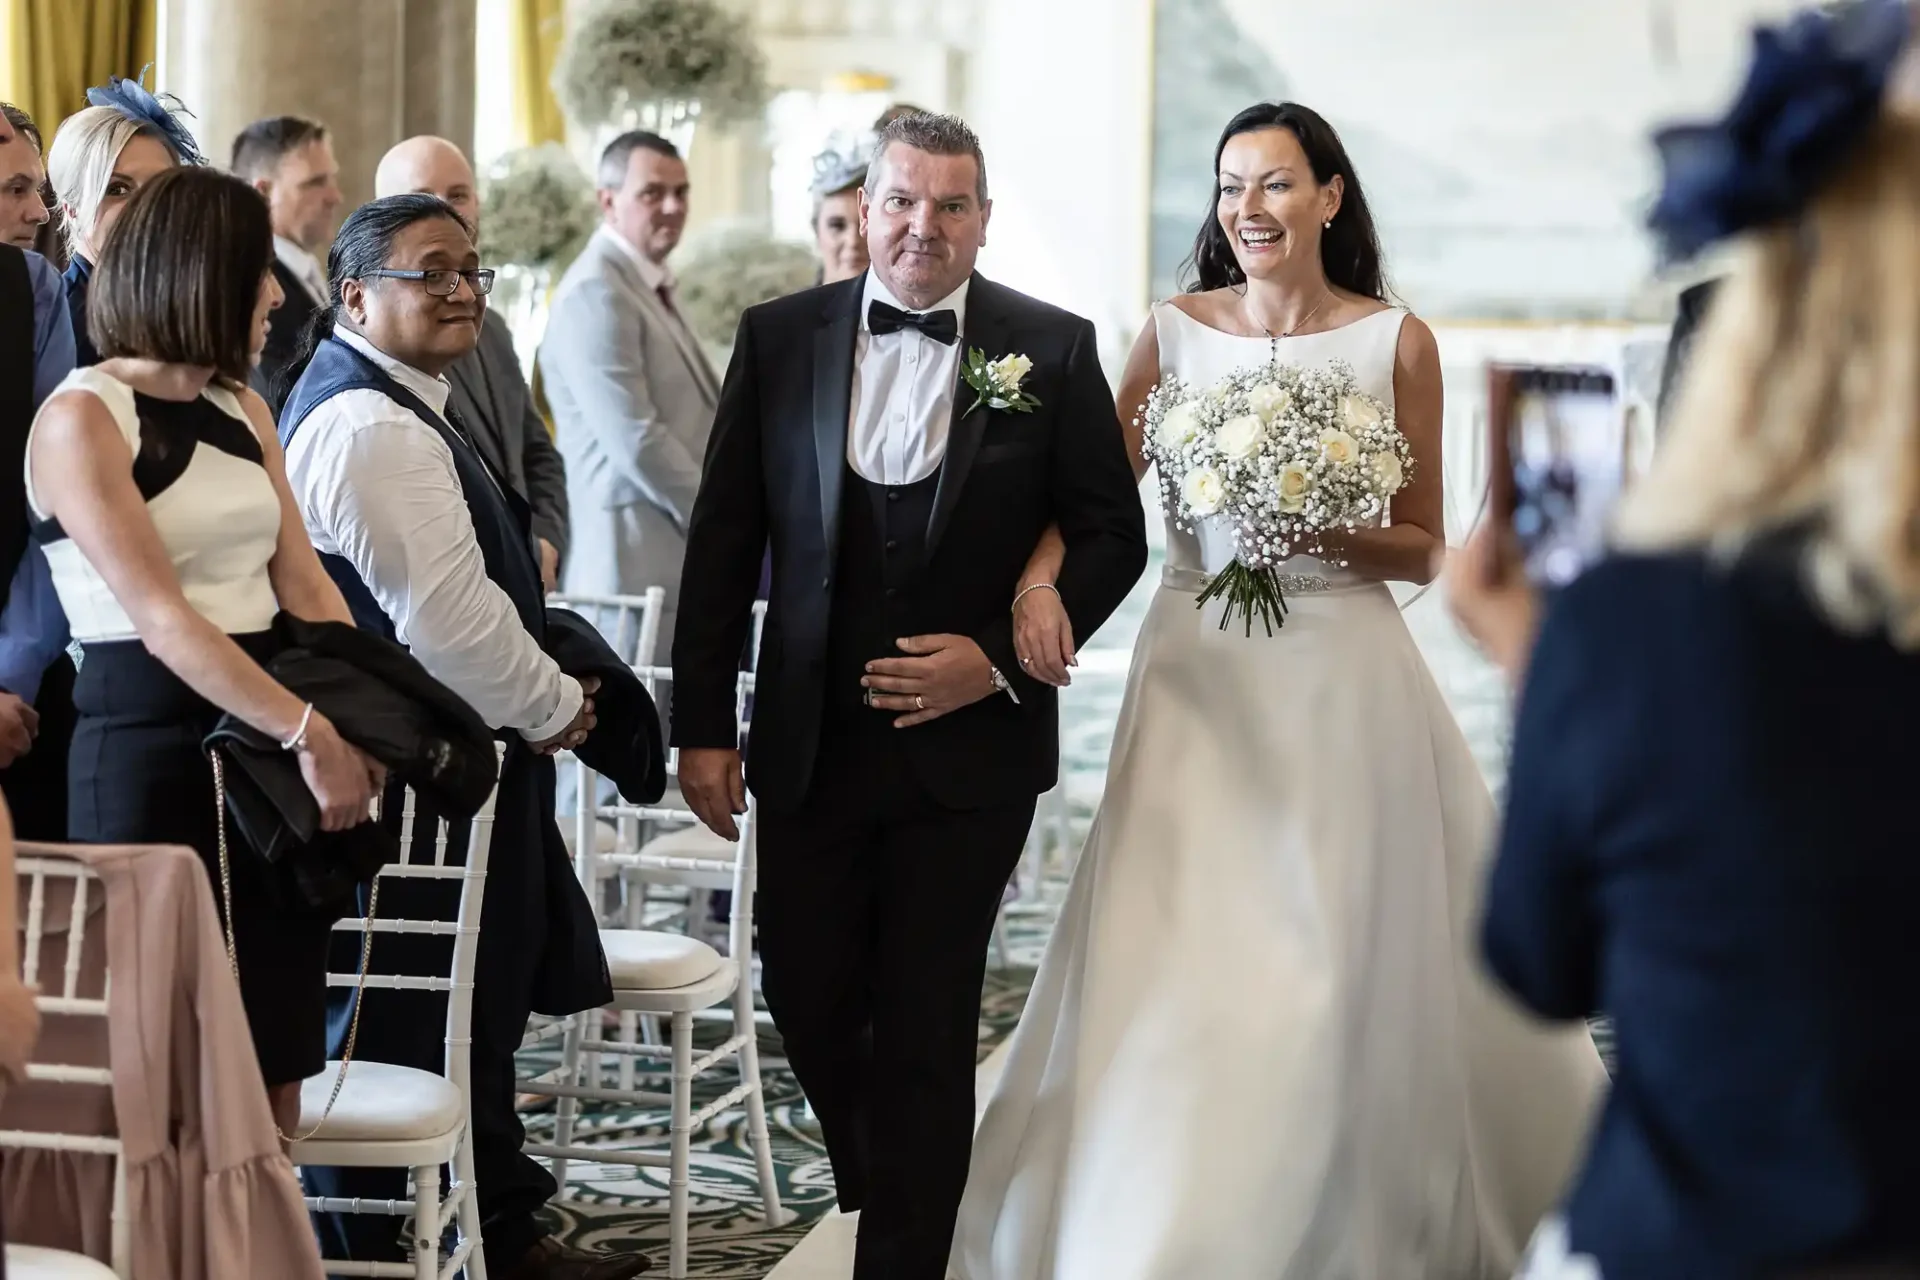 A bride and groom walking down the aisle, smiling, as guests watch and one guest takes a photo.